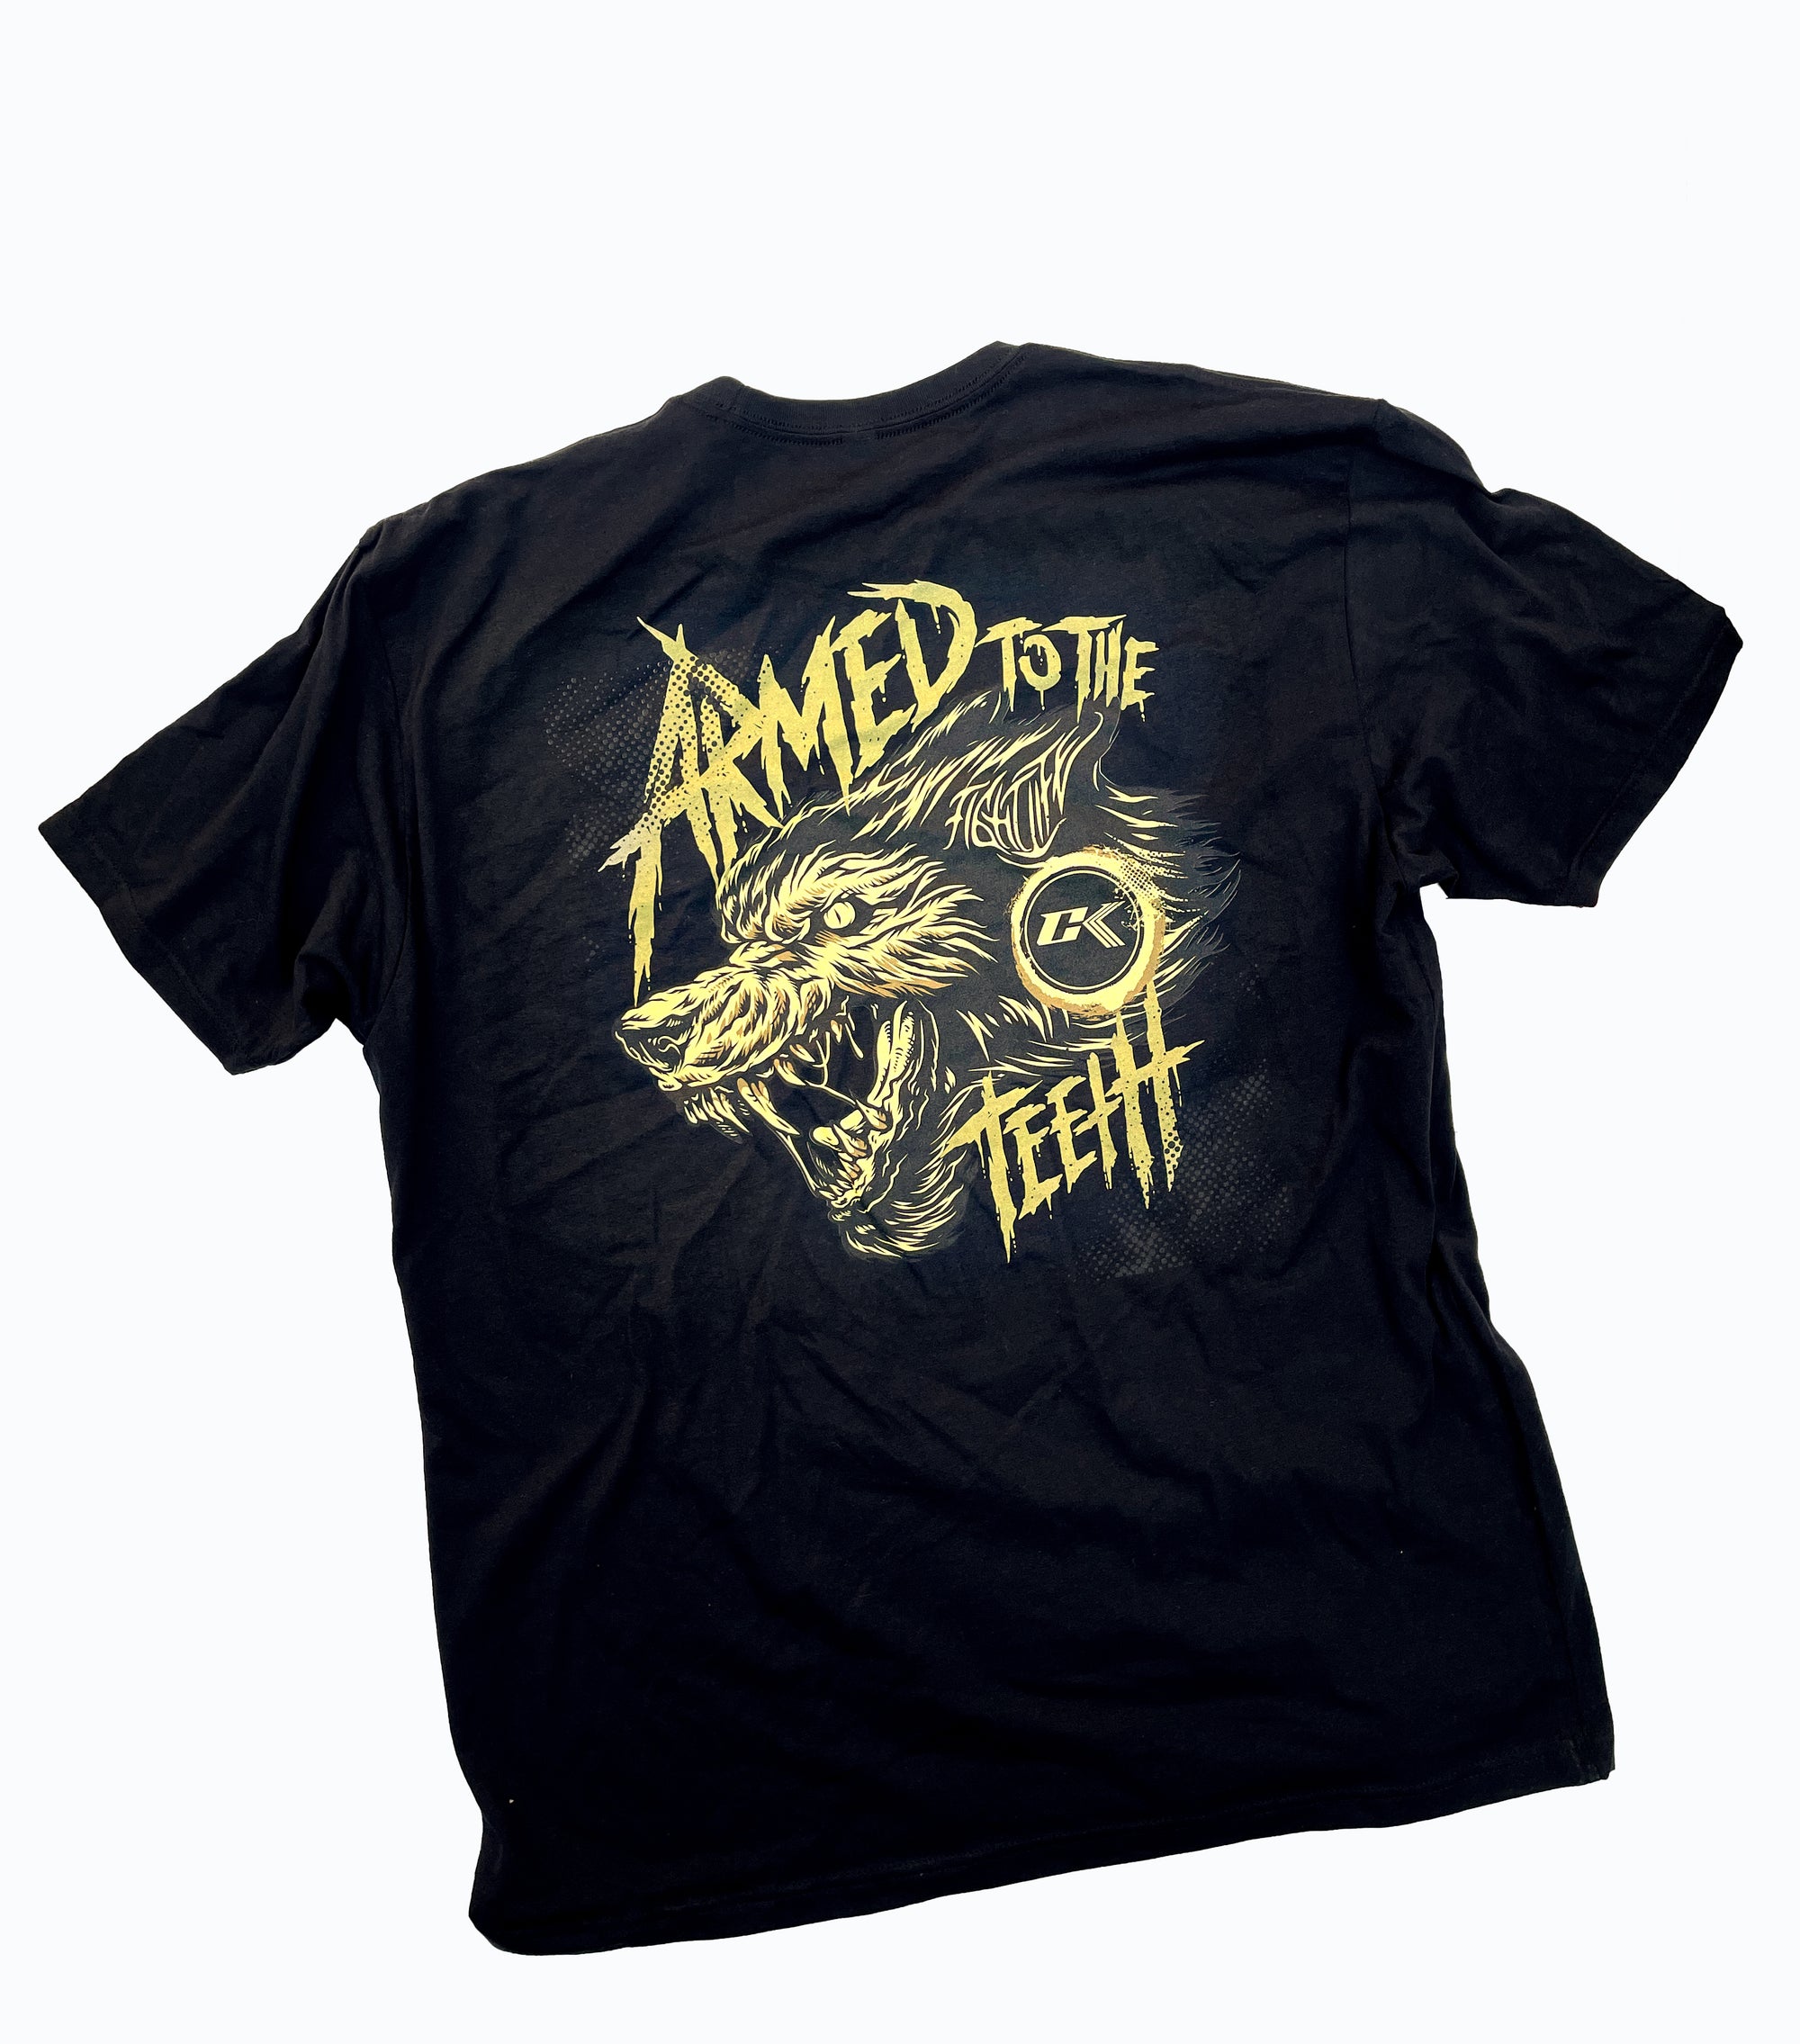 Copy of NEW 2023 CK SHIRT "ARMED TO THE TEETH" 2ND COLORWAY